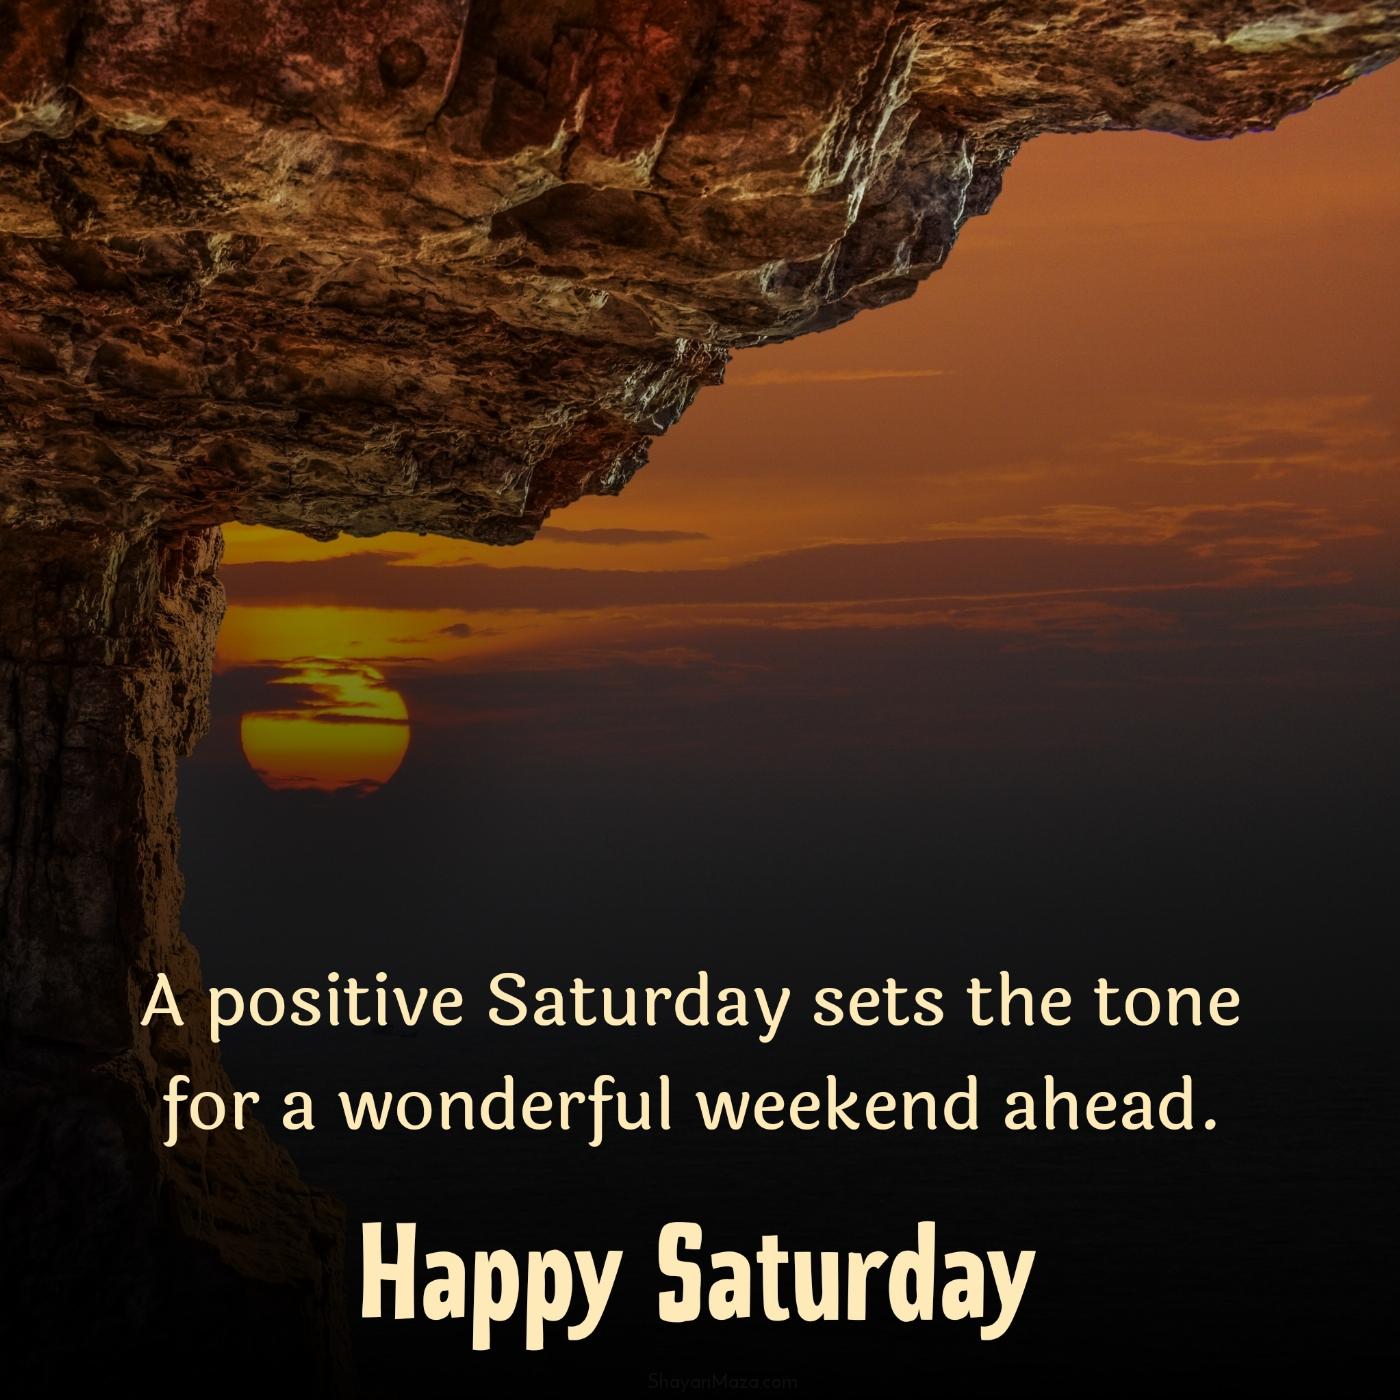 A positive Saturday sets the tone for a wonderful weekend ahead